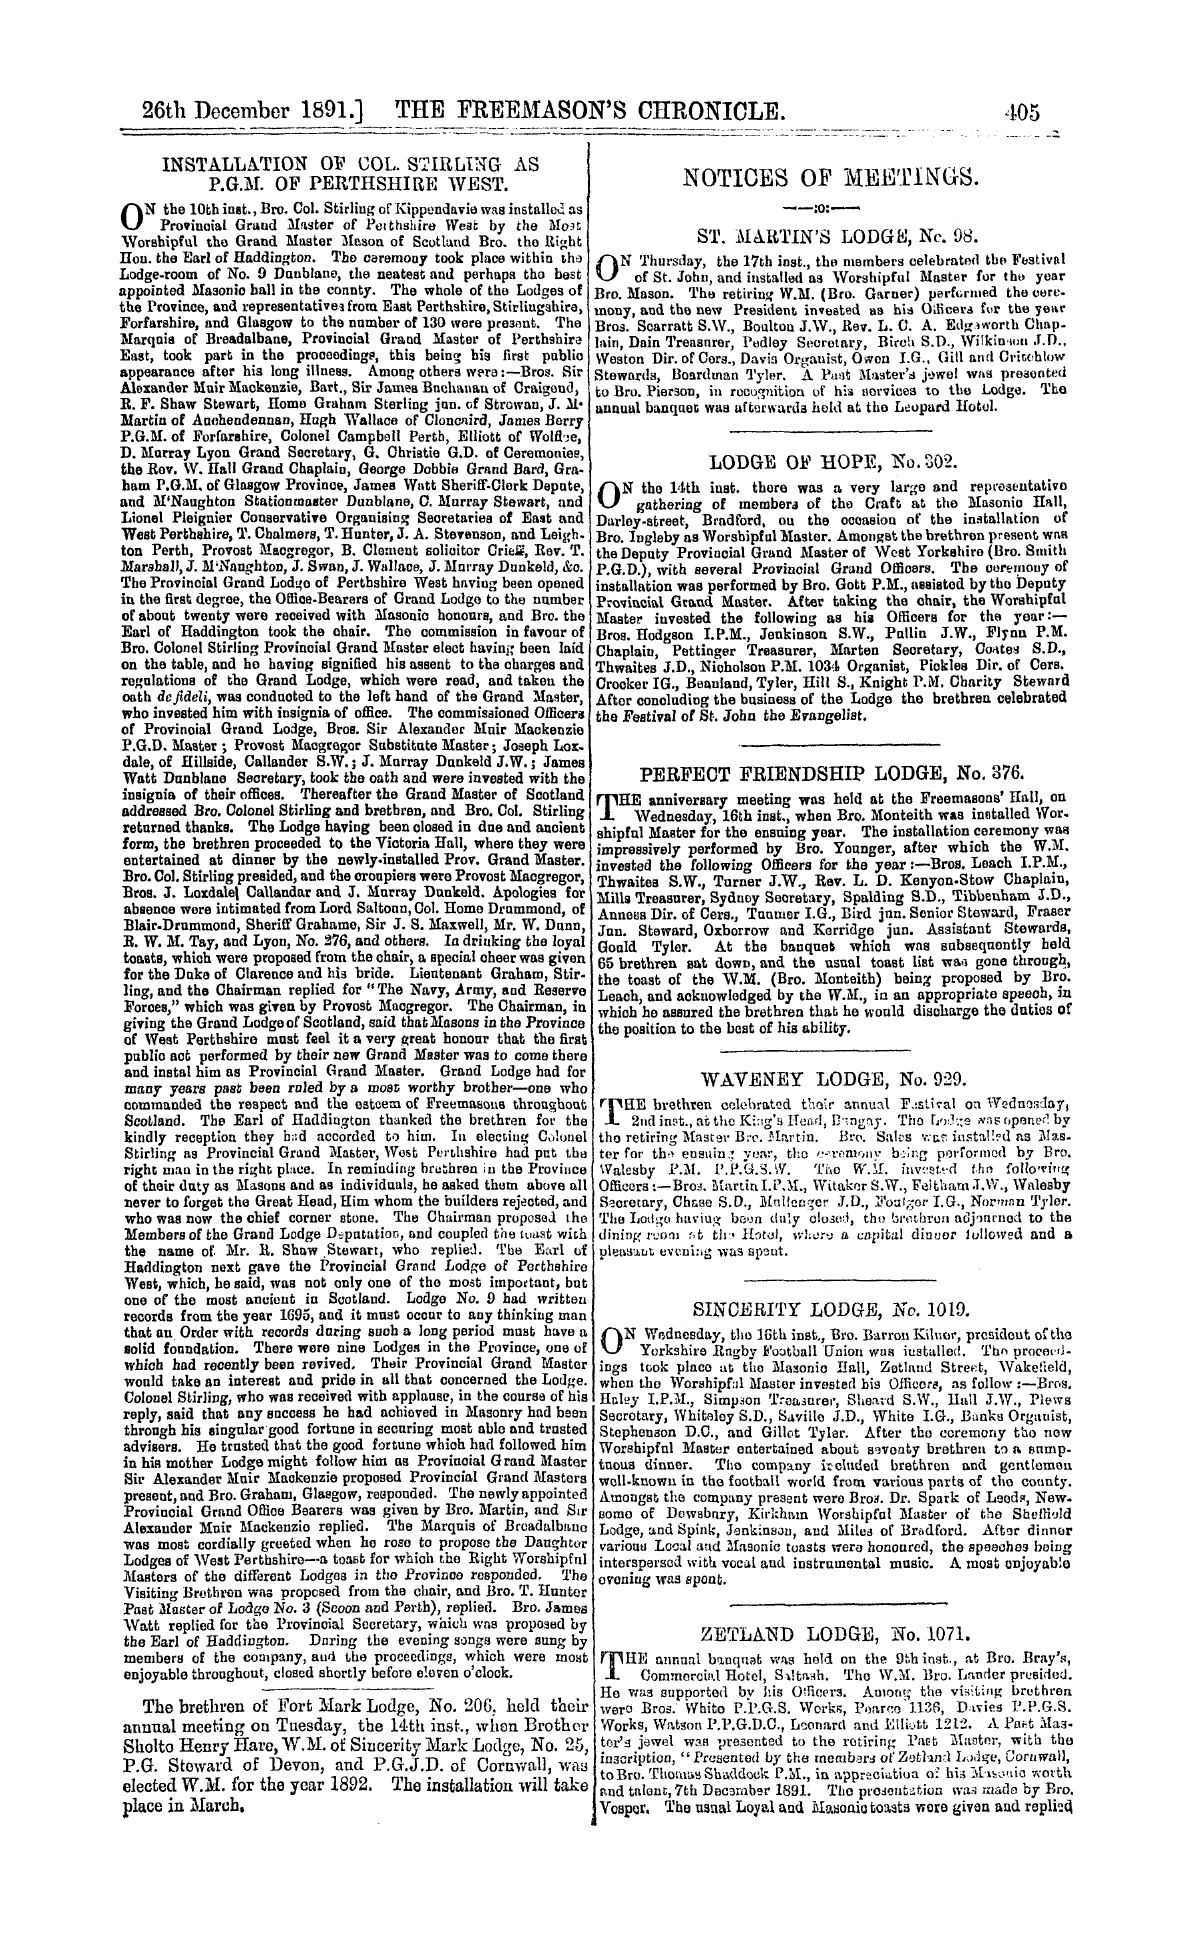 The Freemason's Chronicle: 1891-12-26 - Installation Of Col. Stirling As P.G.M. Of Perthshire West.